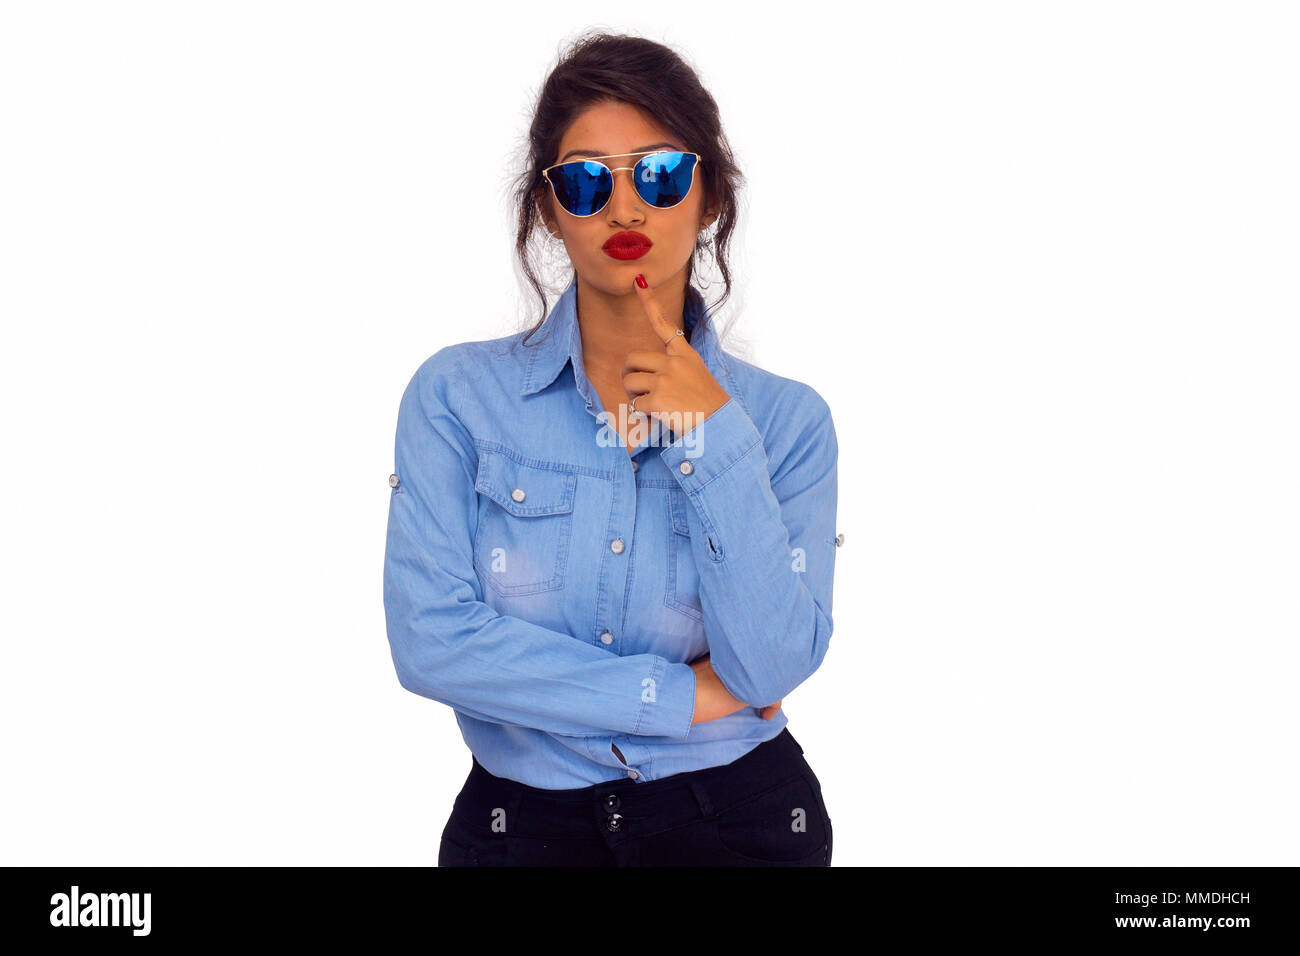 Stylish woman in blue top, wearing goggles with lips pursed and ...